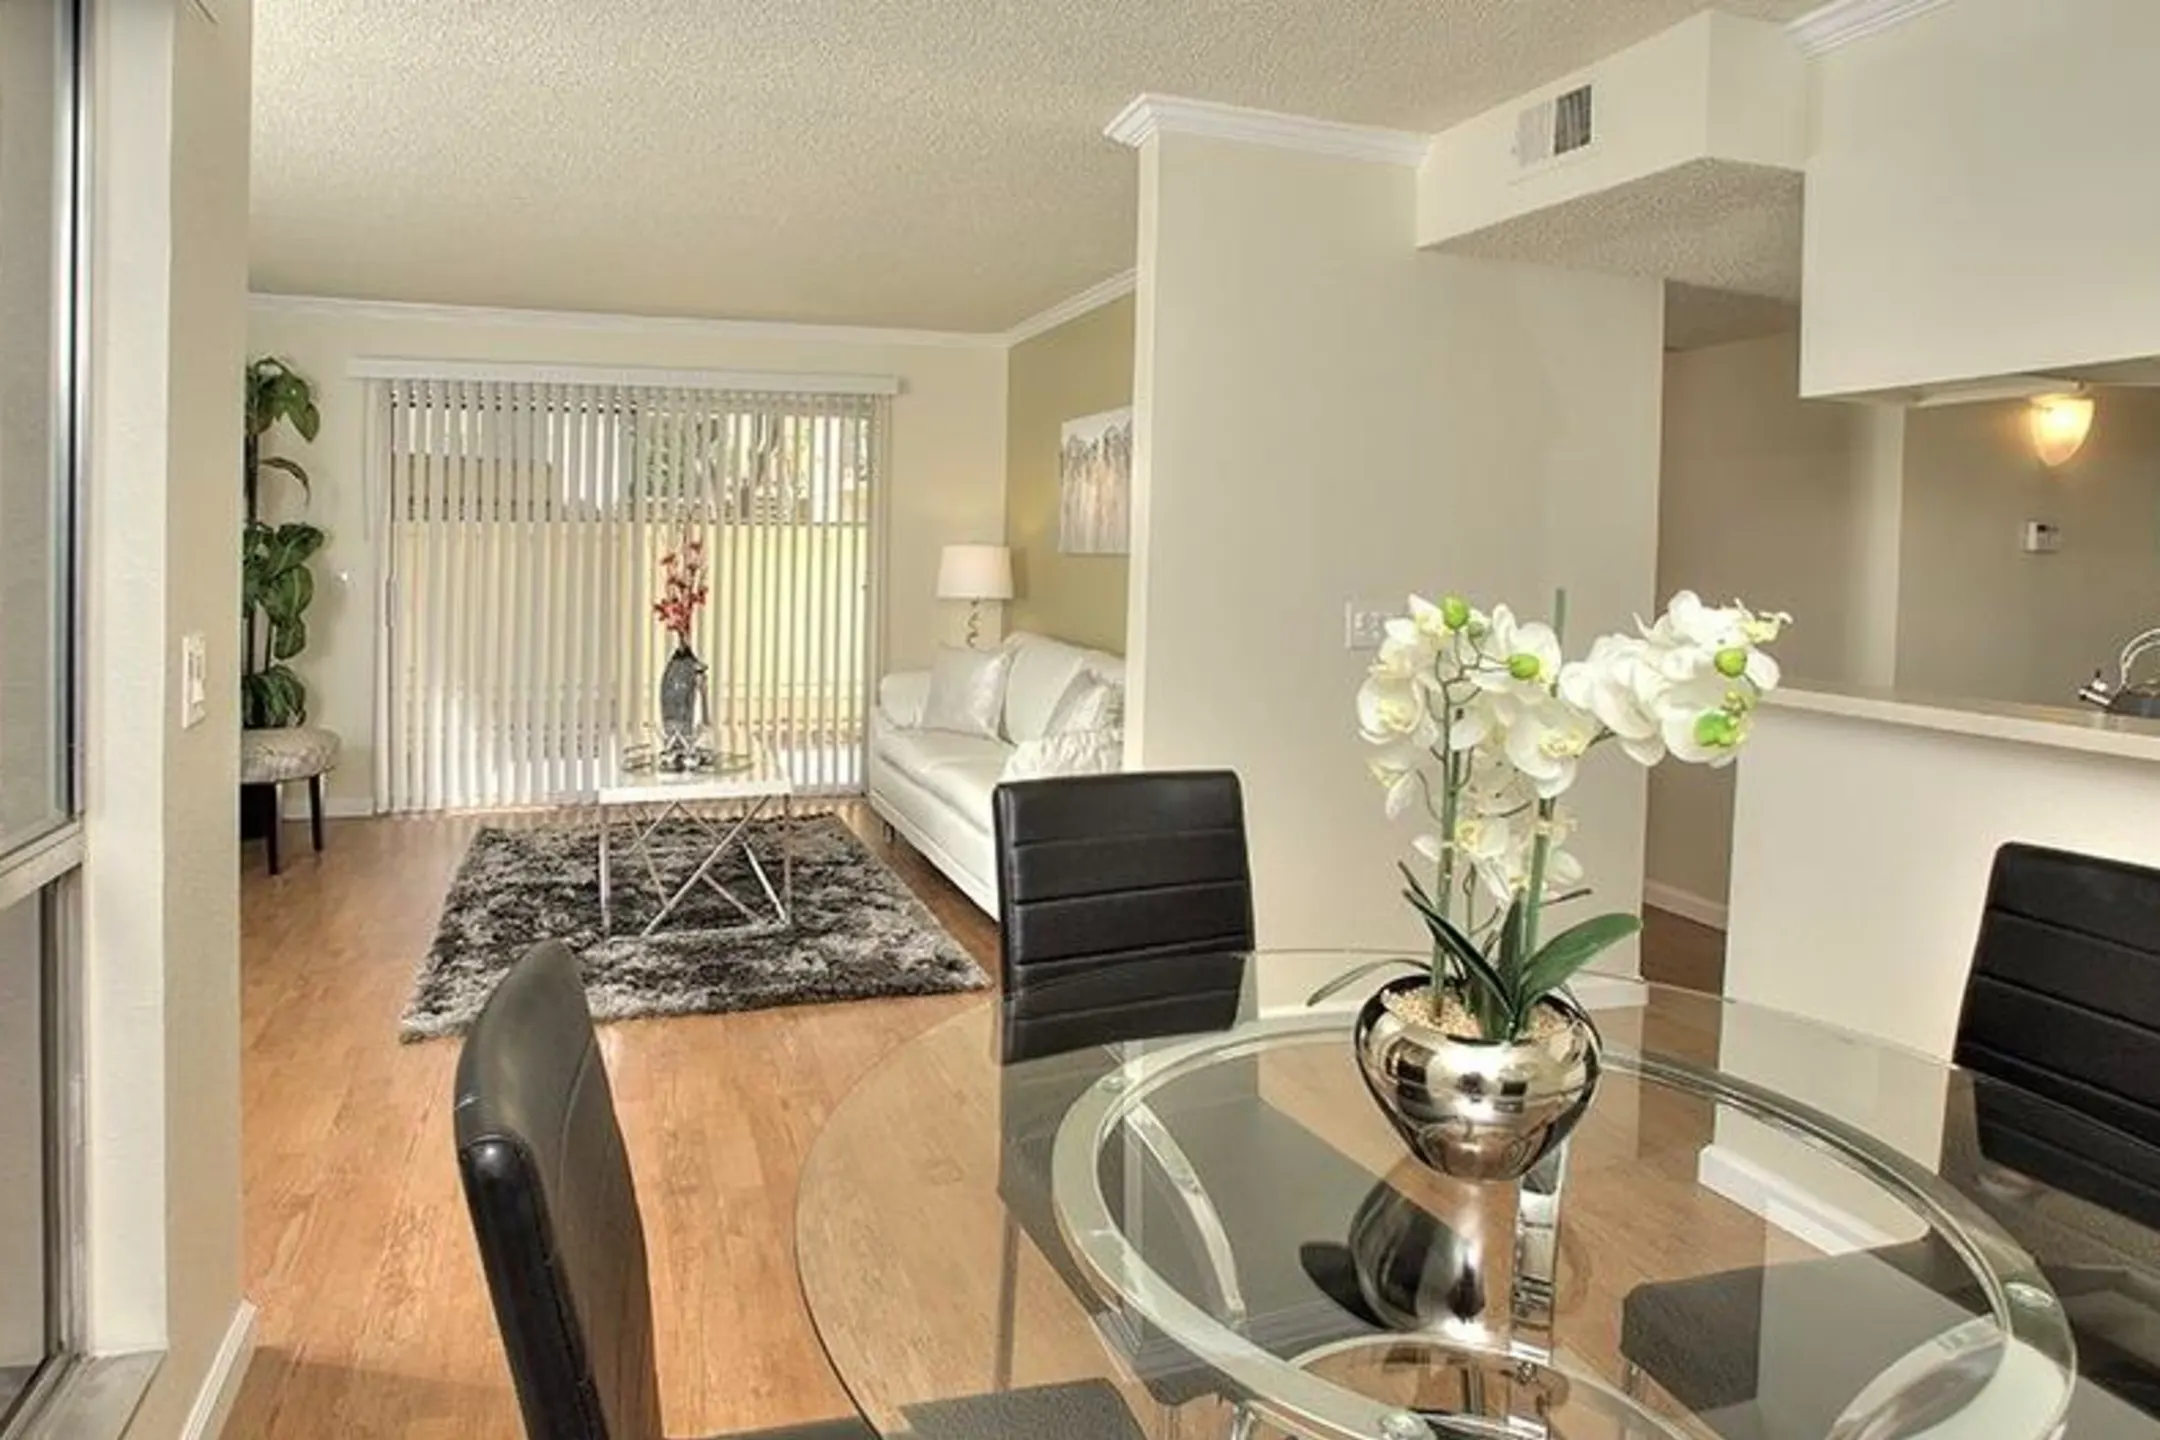 Dining Room - Creekside Gardens Apartments - Vacaville, CA